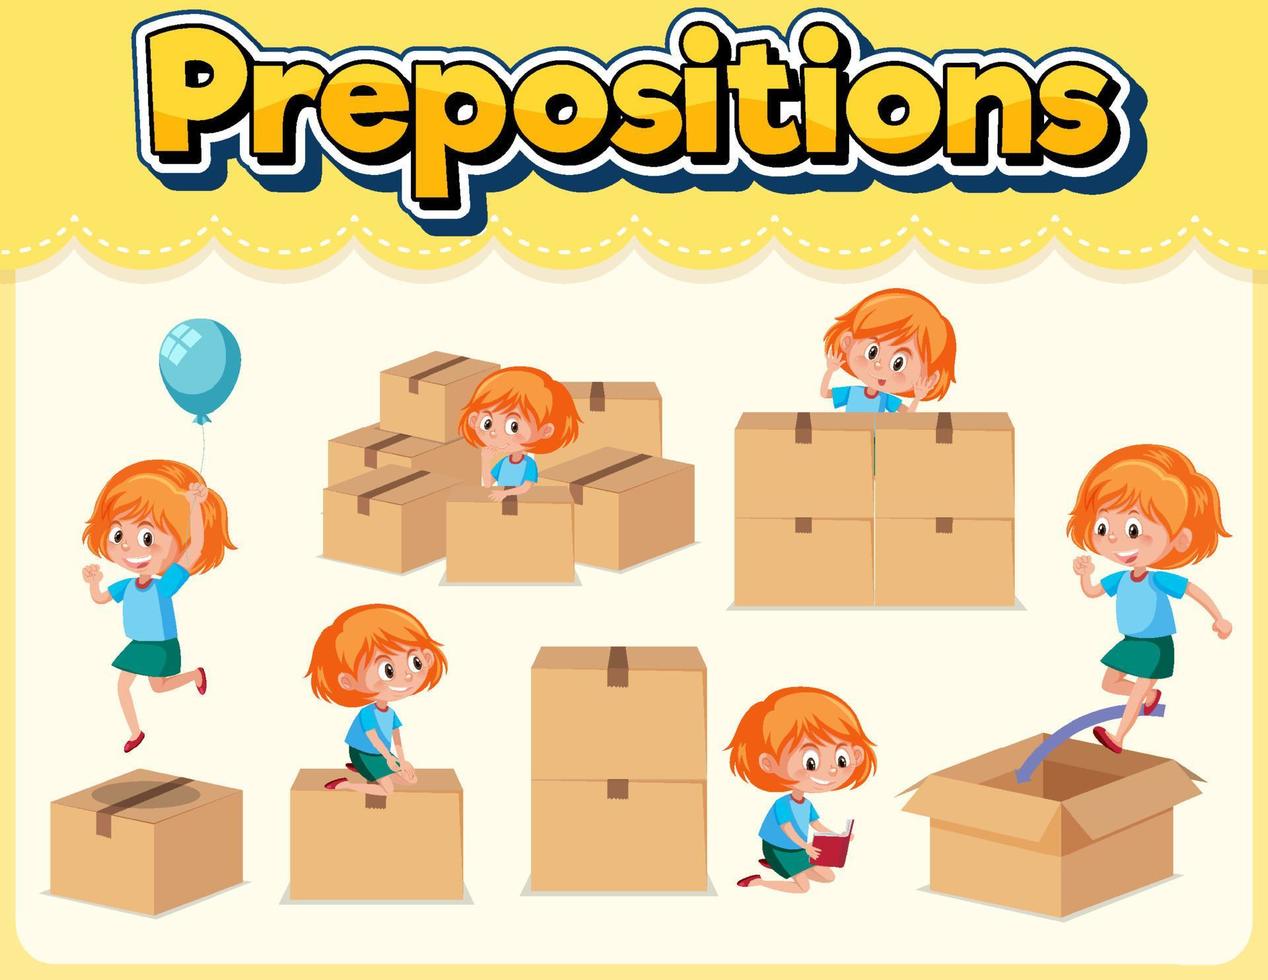 Preposition wordcard with girl and box vector